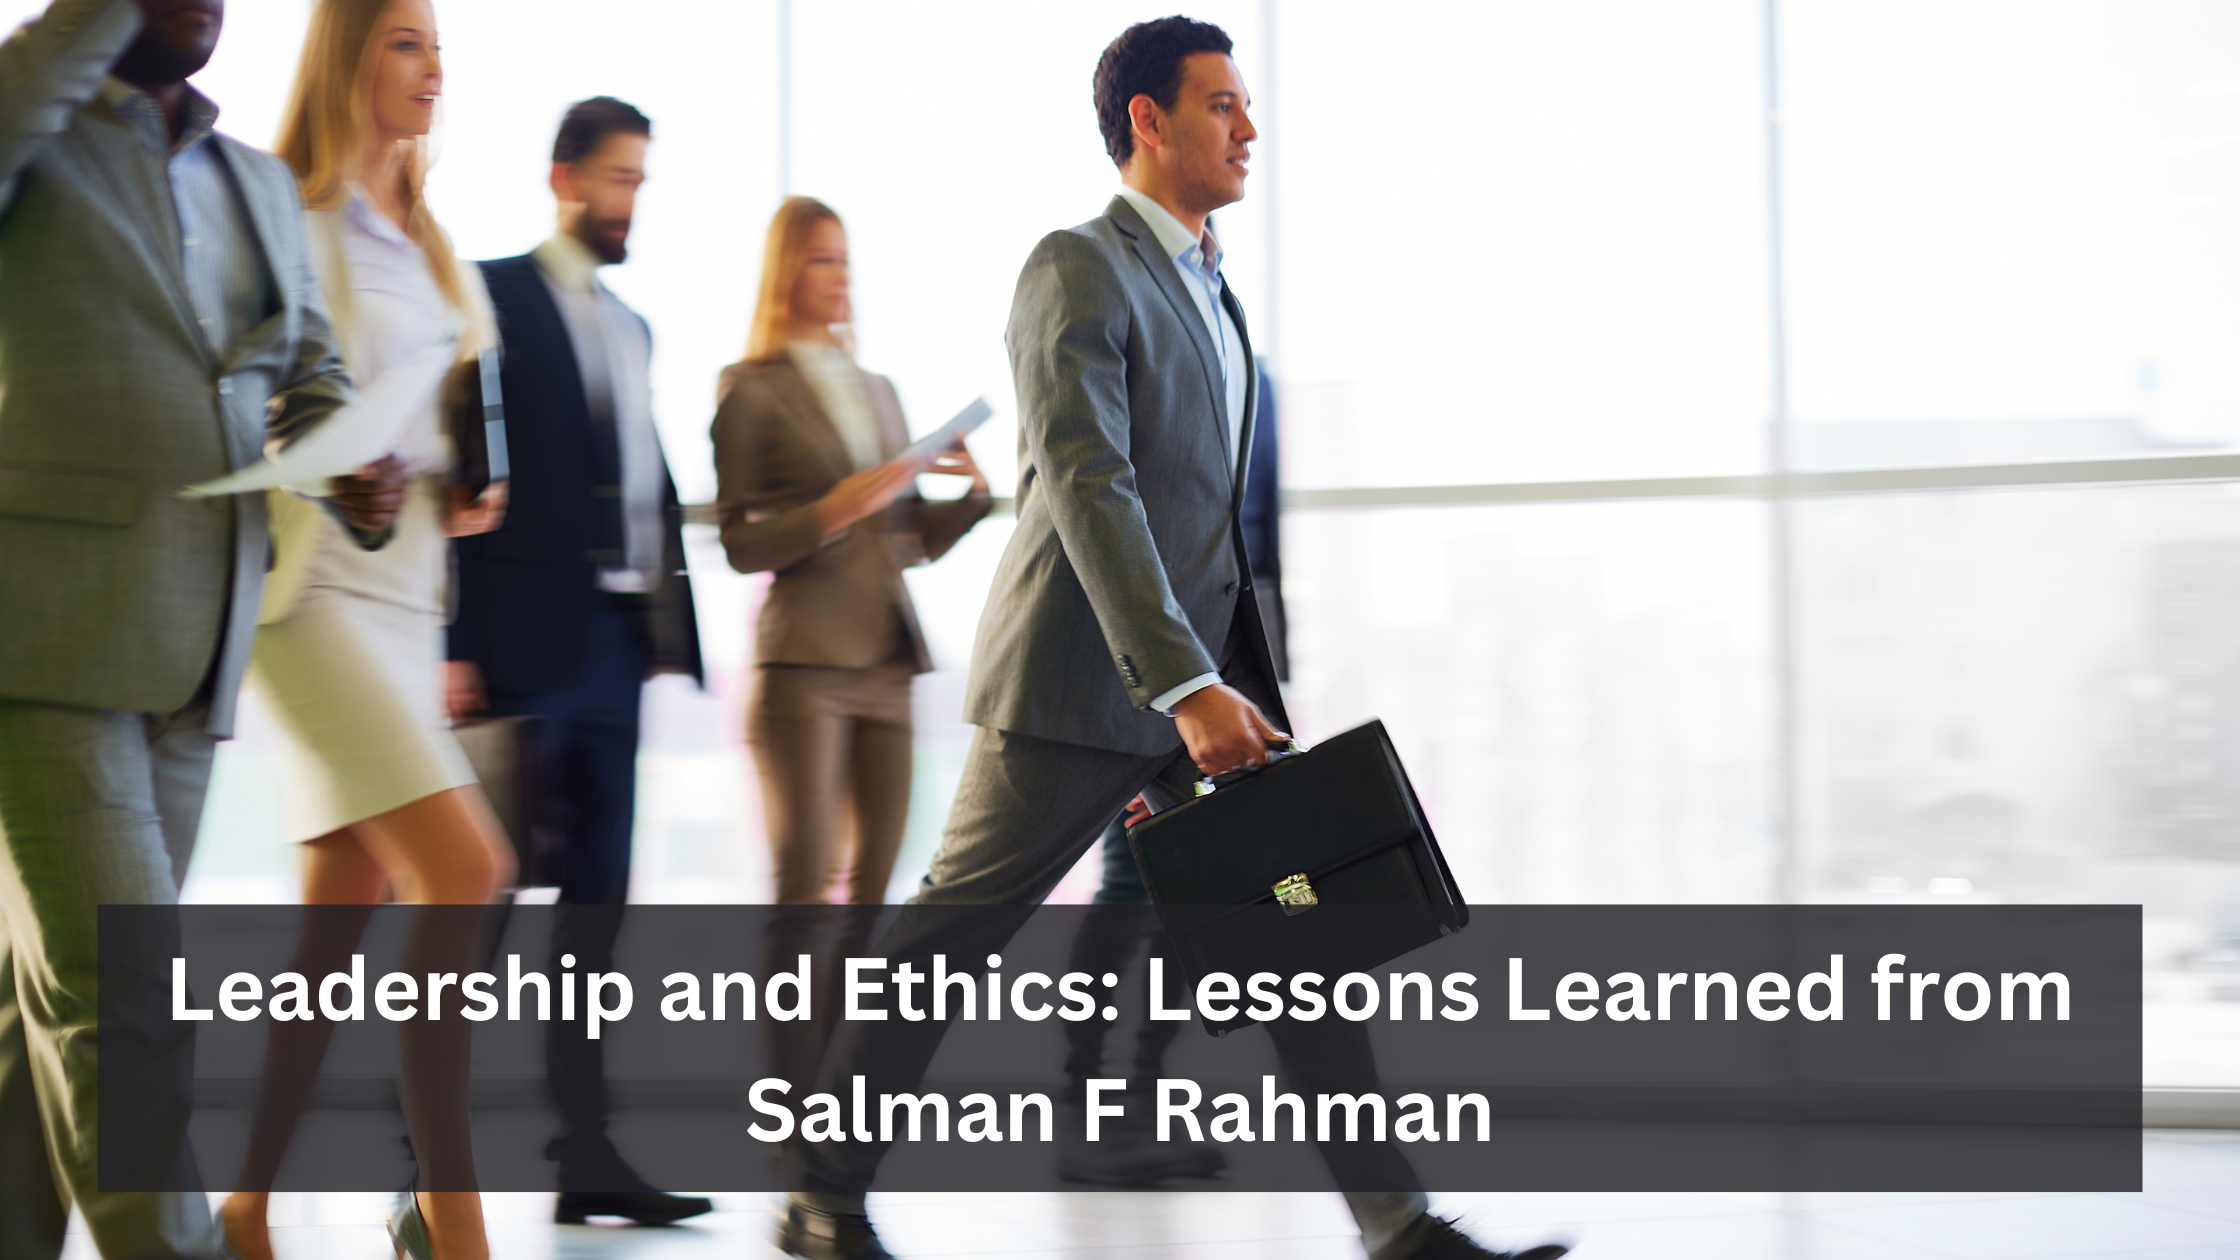 Leadership and Ethics: Lessons Learned from Salman F Rahman